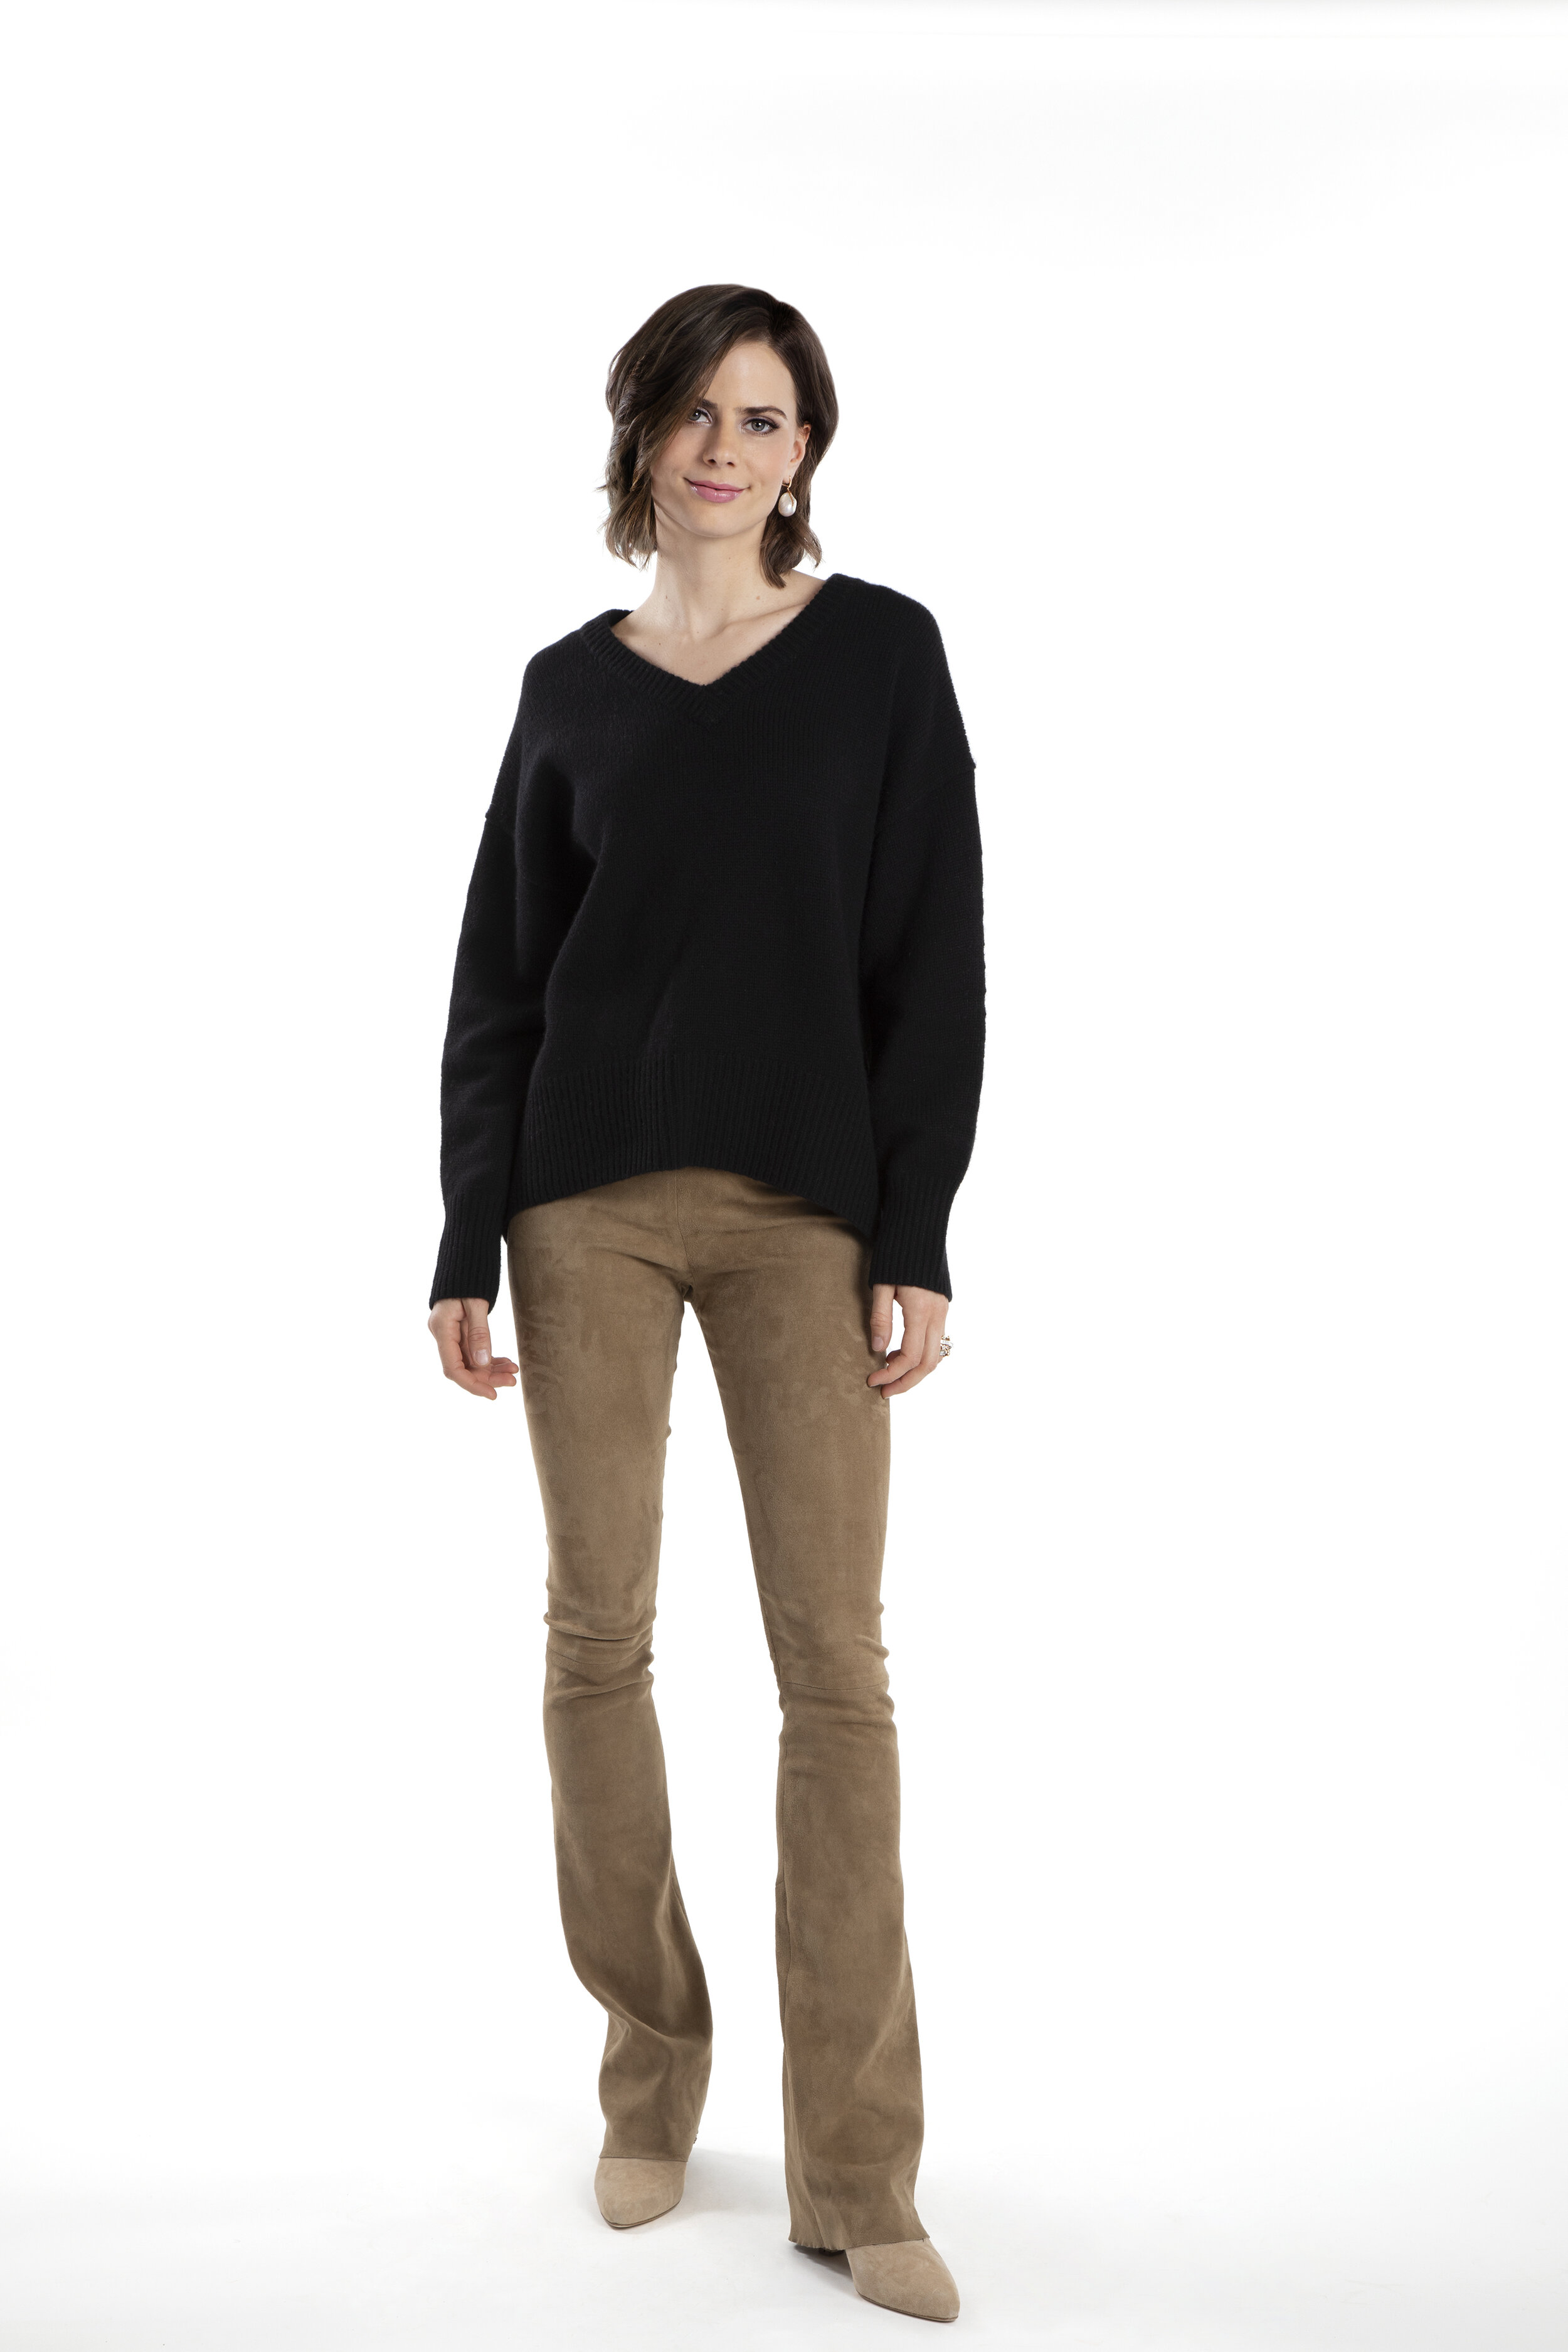 Suede Bootleg Leggings with Stretch, $1495